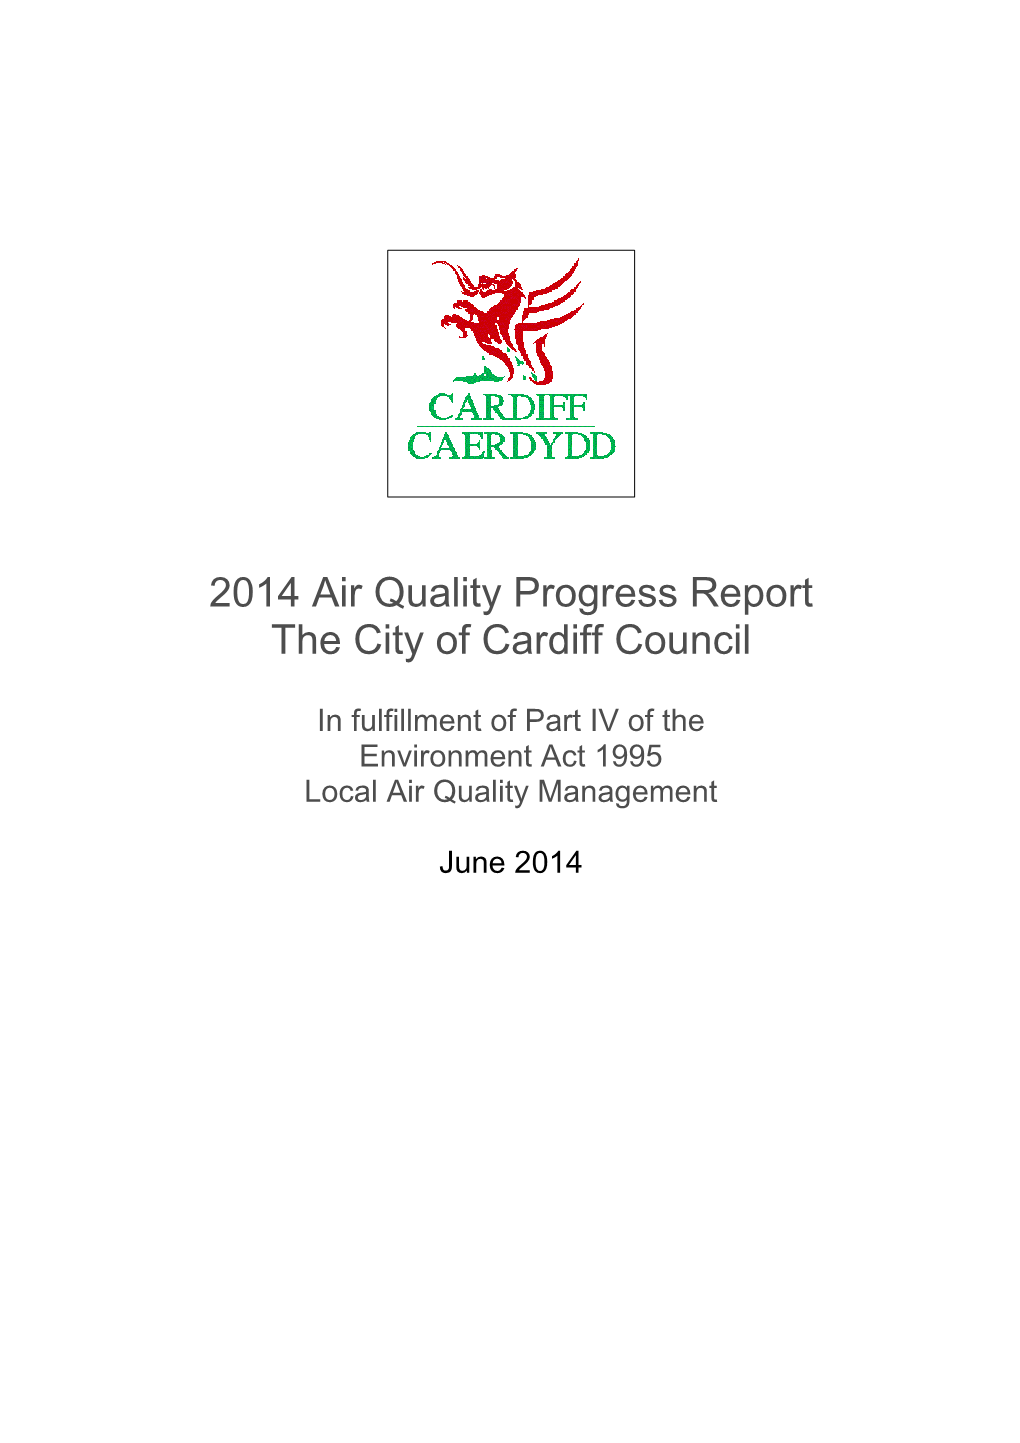 2014 Air Quality Progress Report the City of Cardiff Council